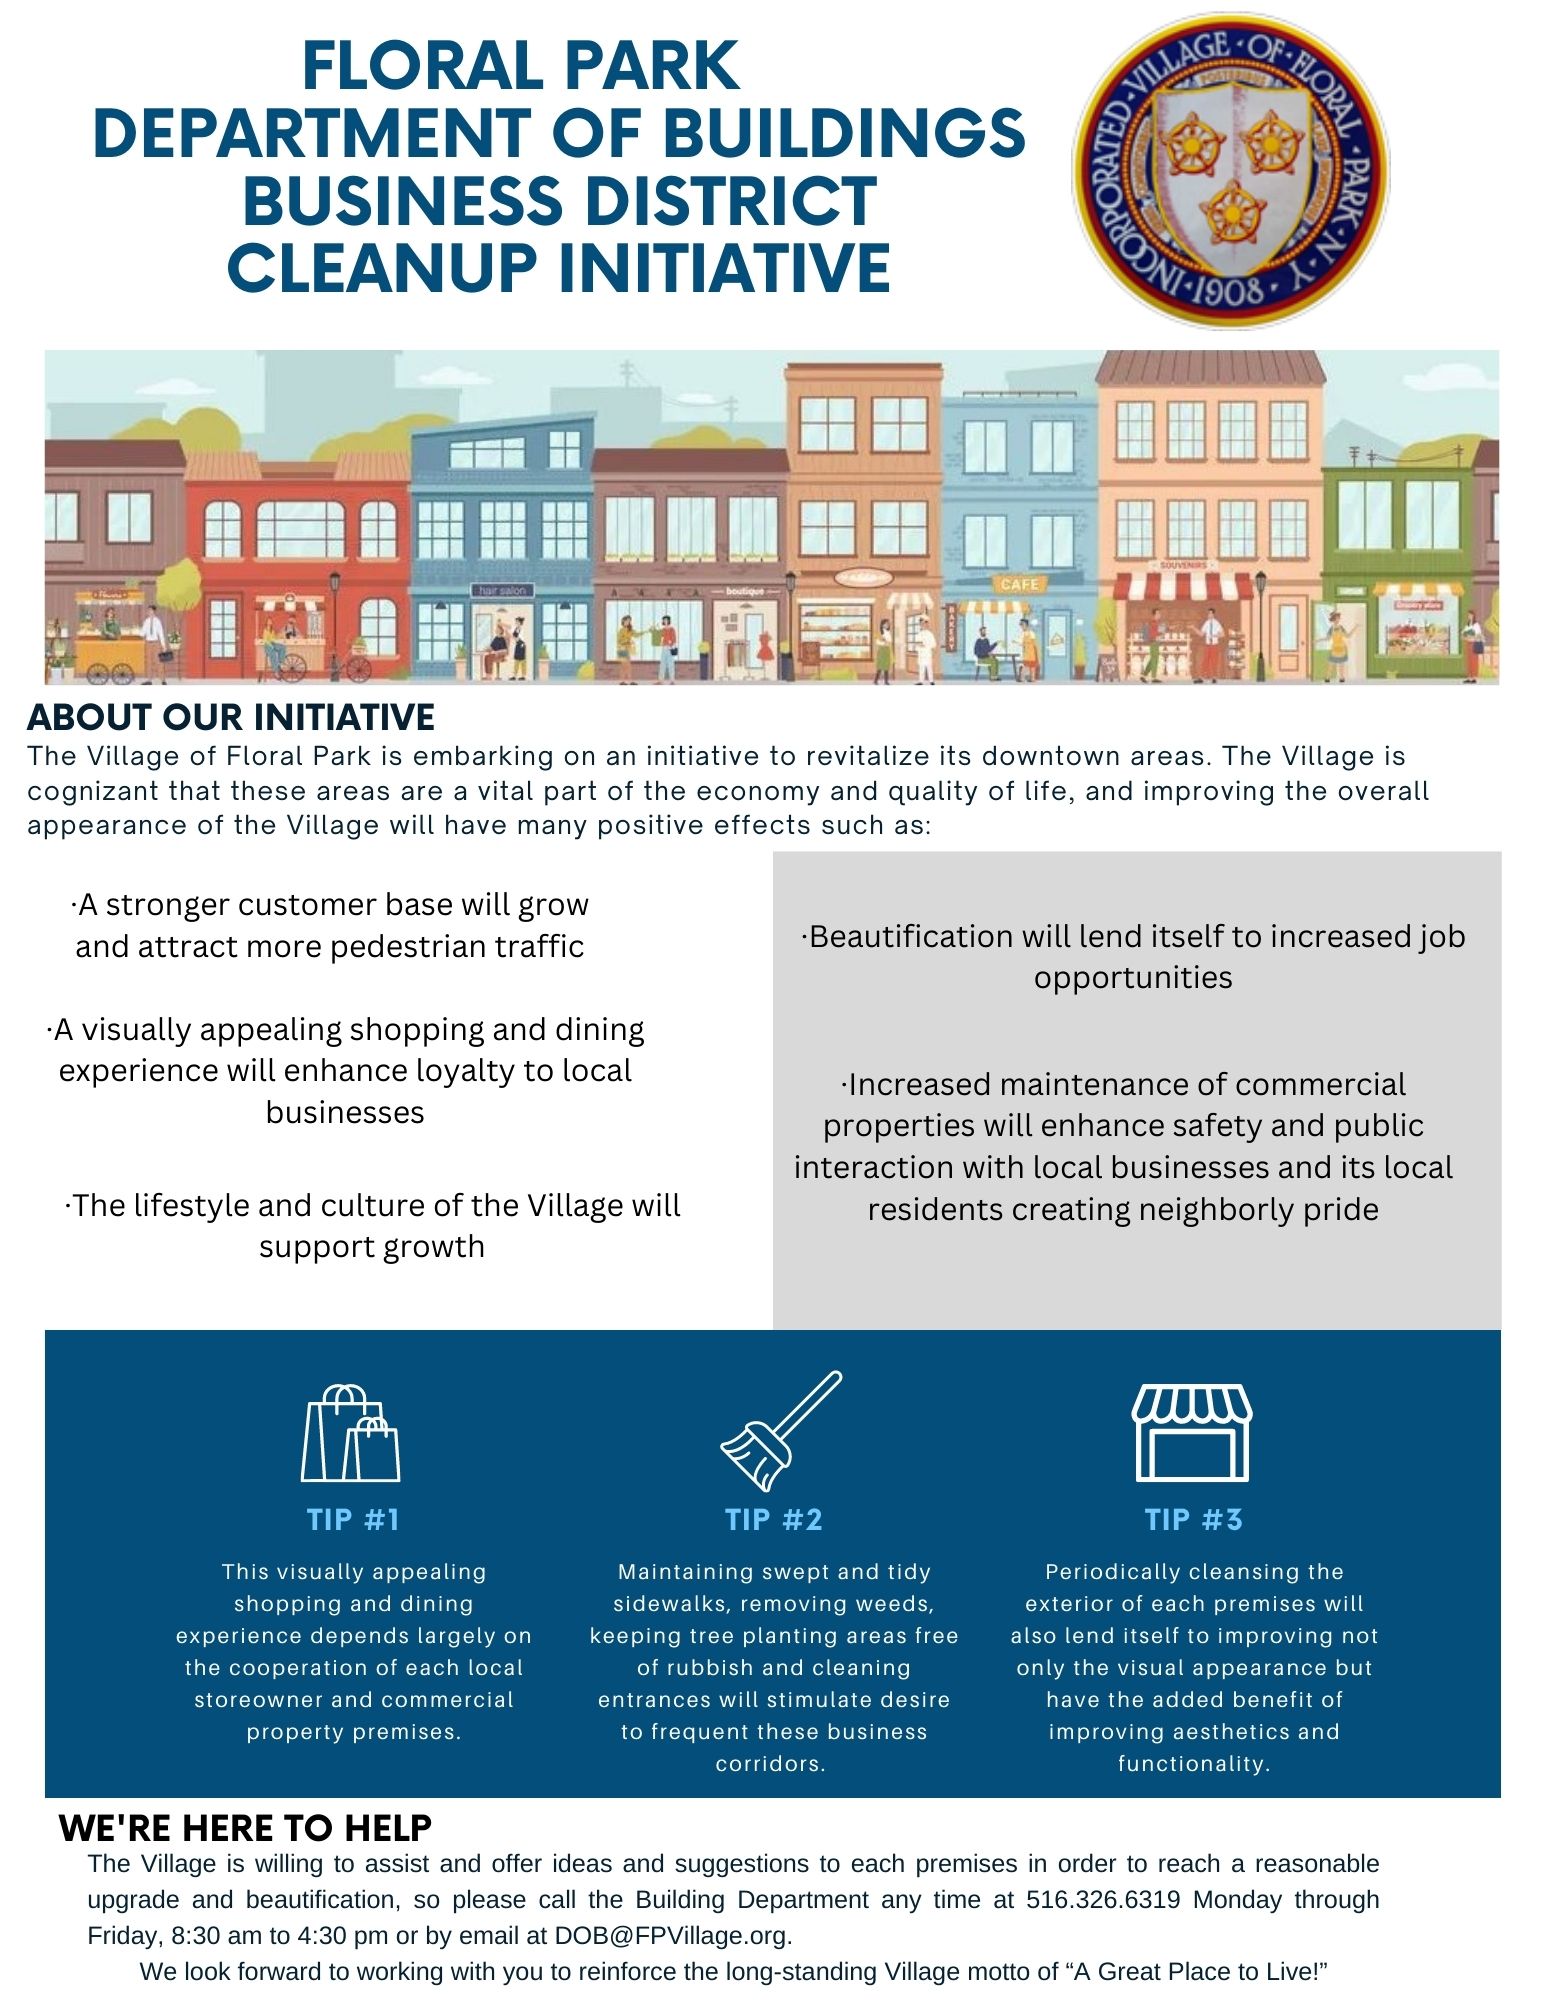 Business District Cleanup Initiative